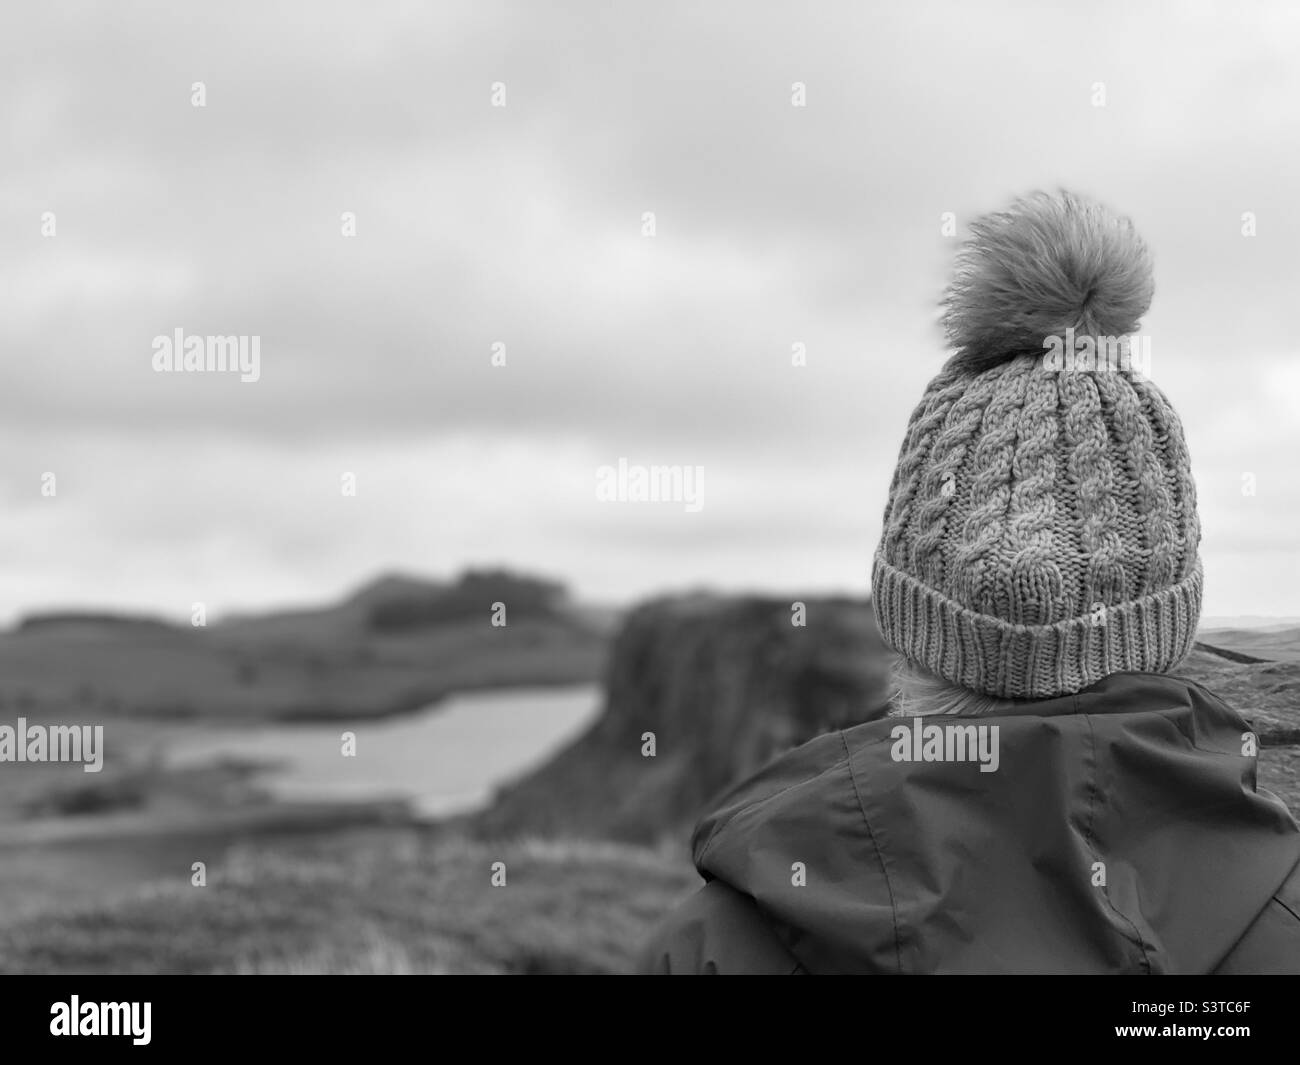 Rear view of woman wearing a knit hat walking in the countryside Stock Photo